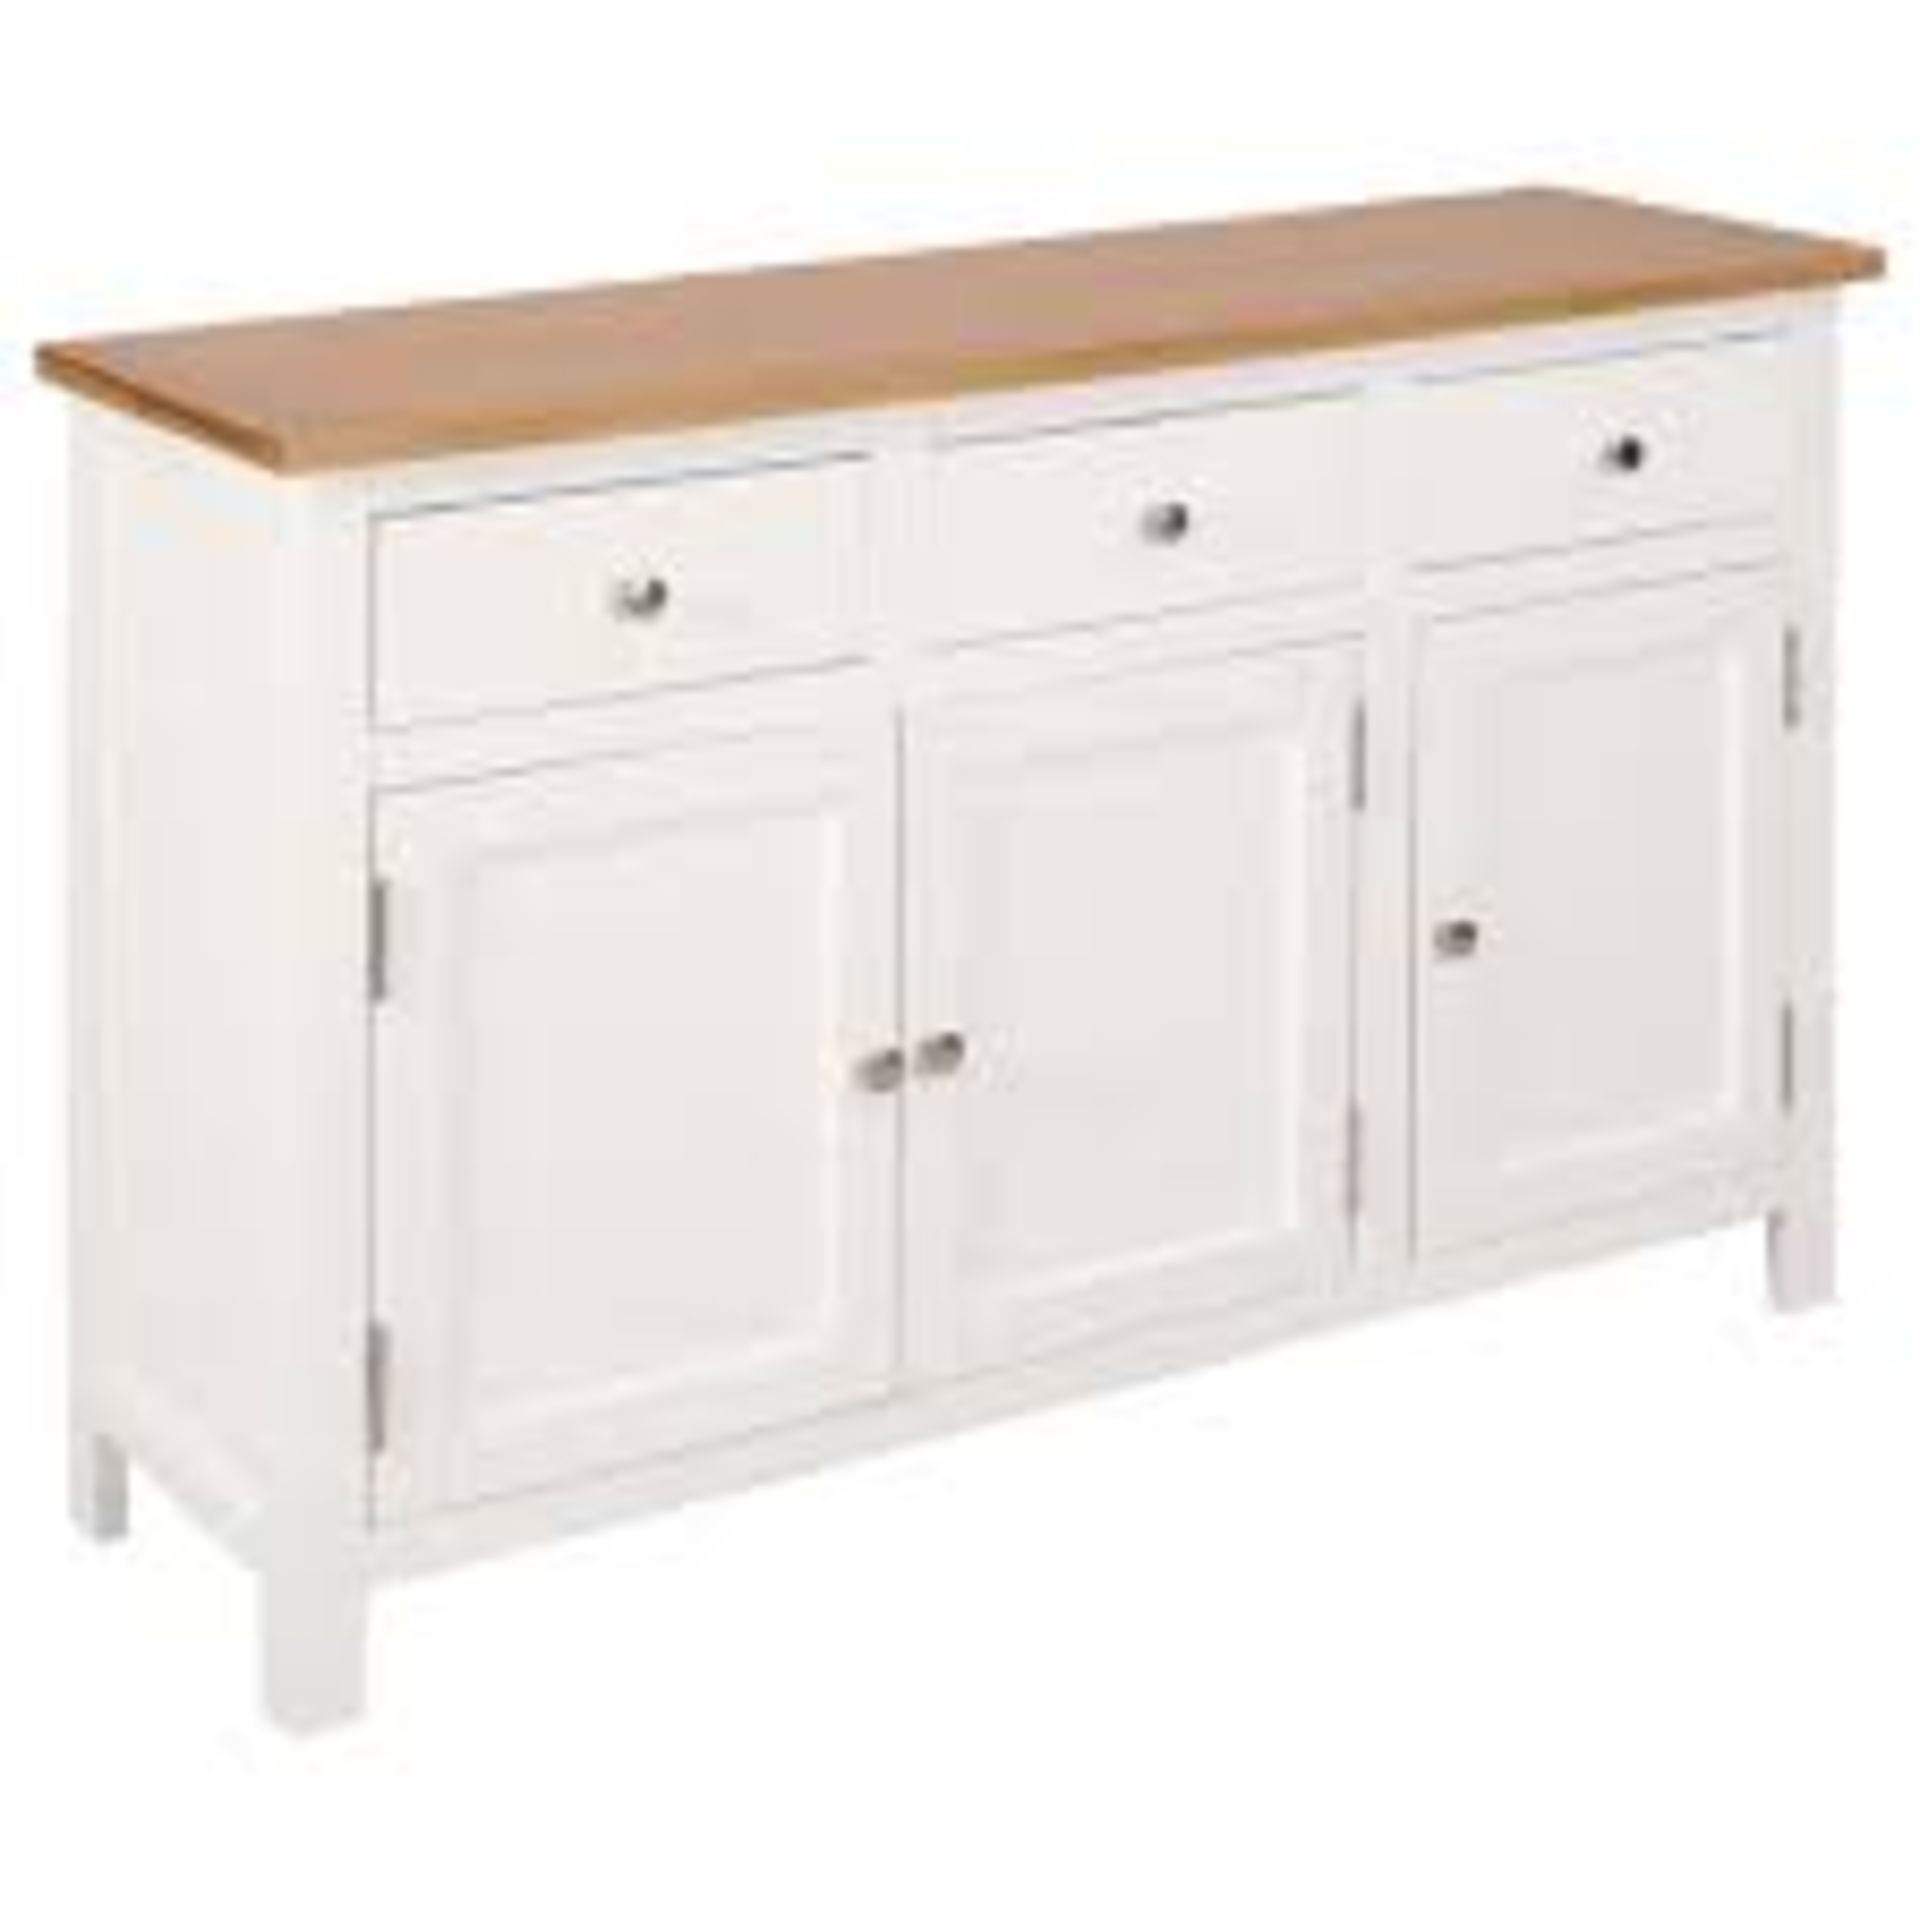 Caterina 110Cm Wide 3 Drawer Oak Solid Wood Sideboard. RRP £349.99. - SR4. This sideboard has been